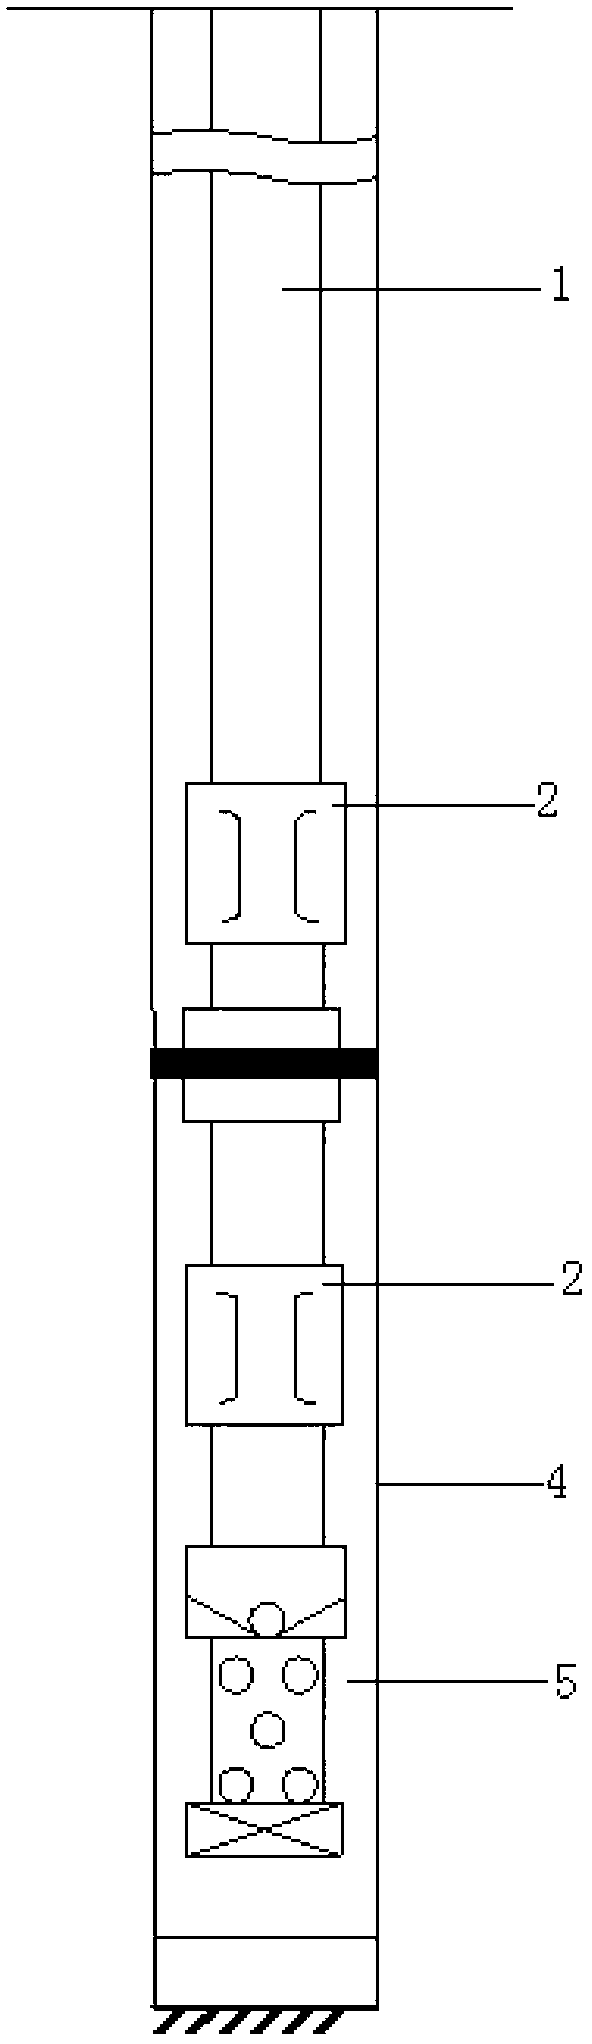 Profile control method for immobile string of injection well